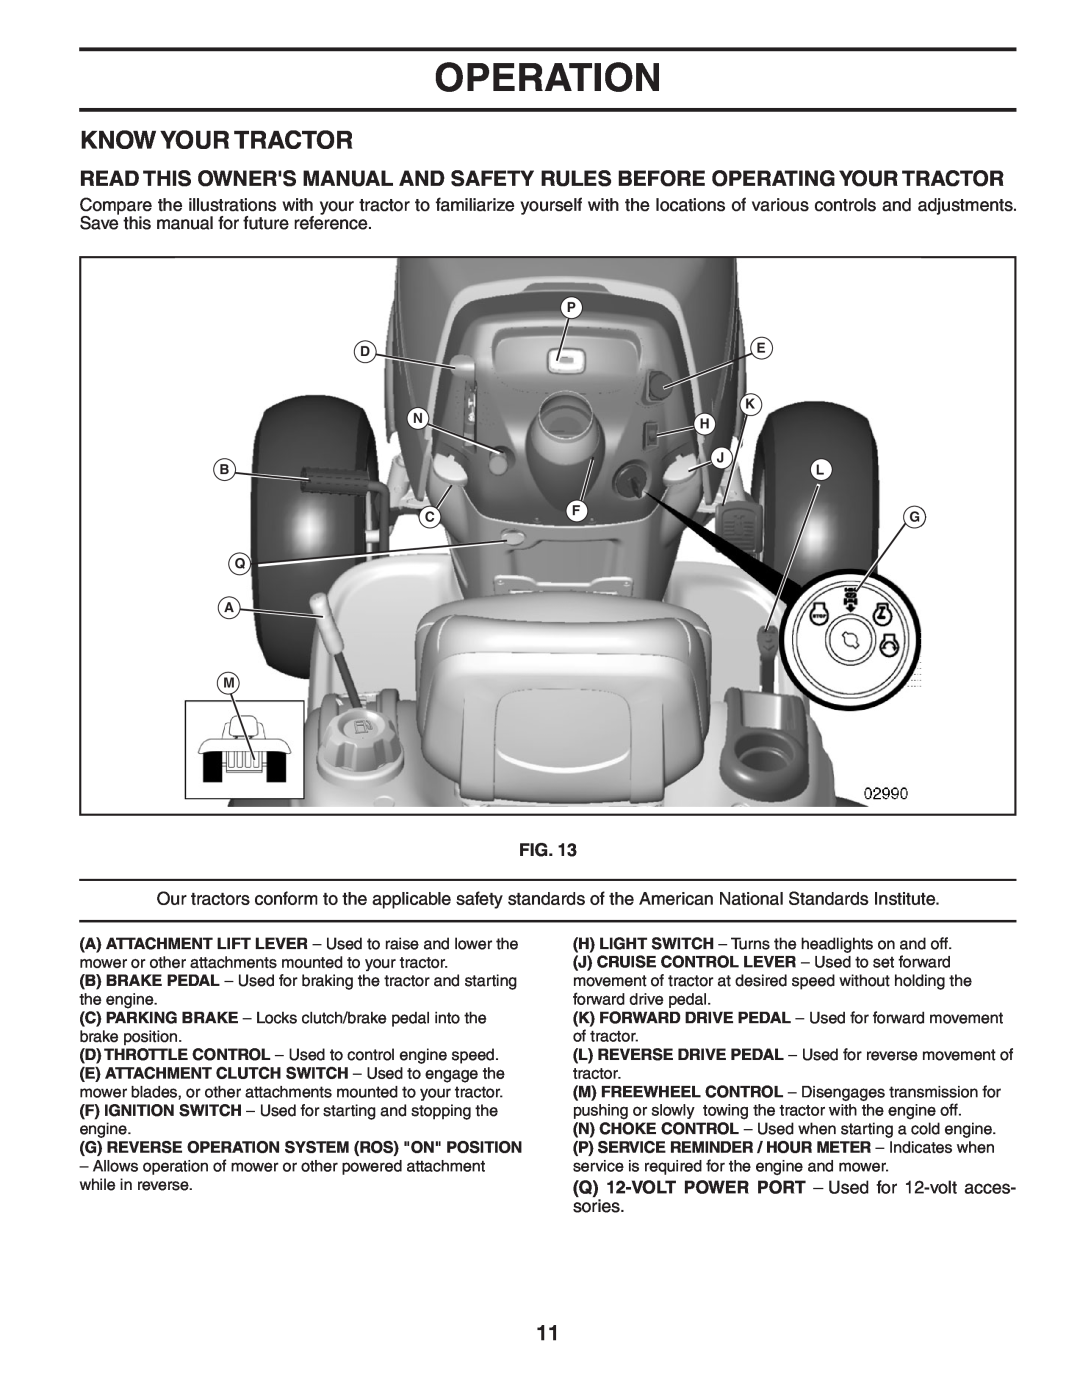 Poulan PBGTGE manual Know Your Tractor, Operation 